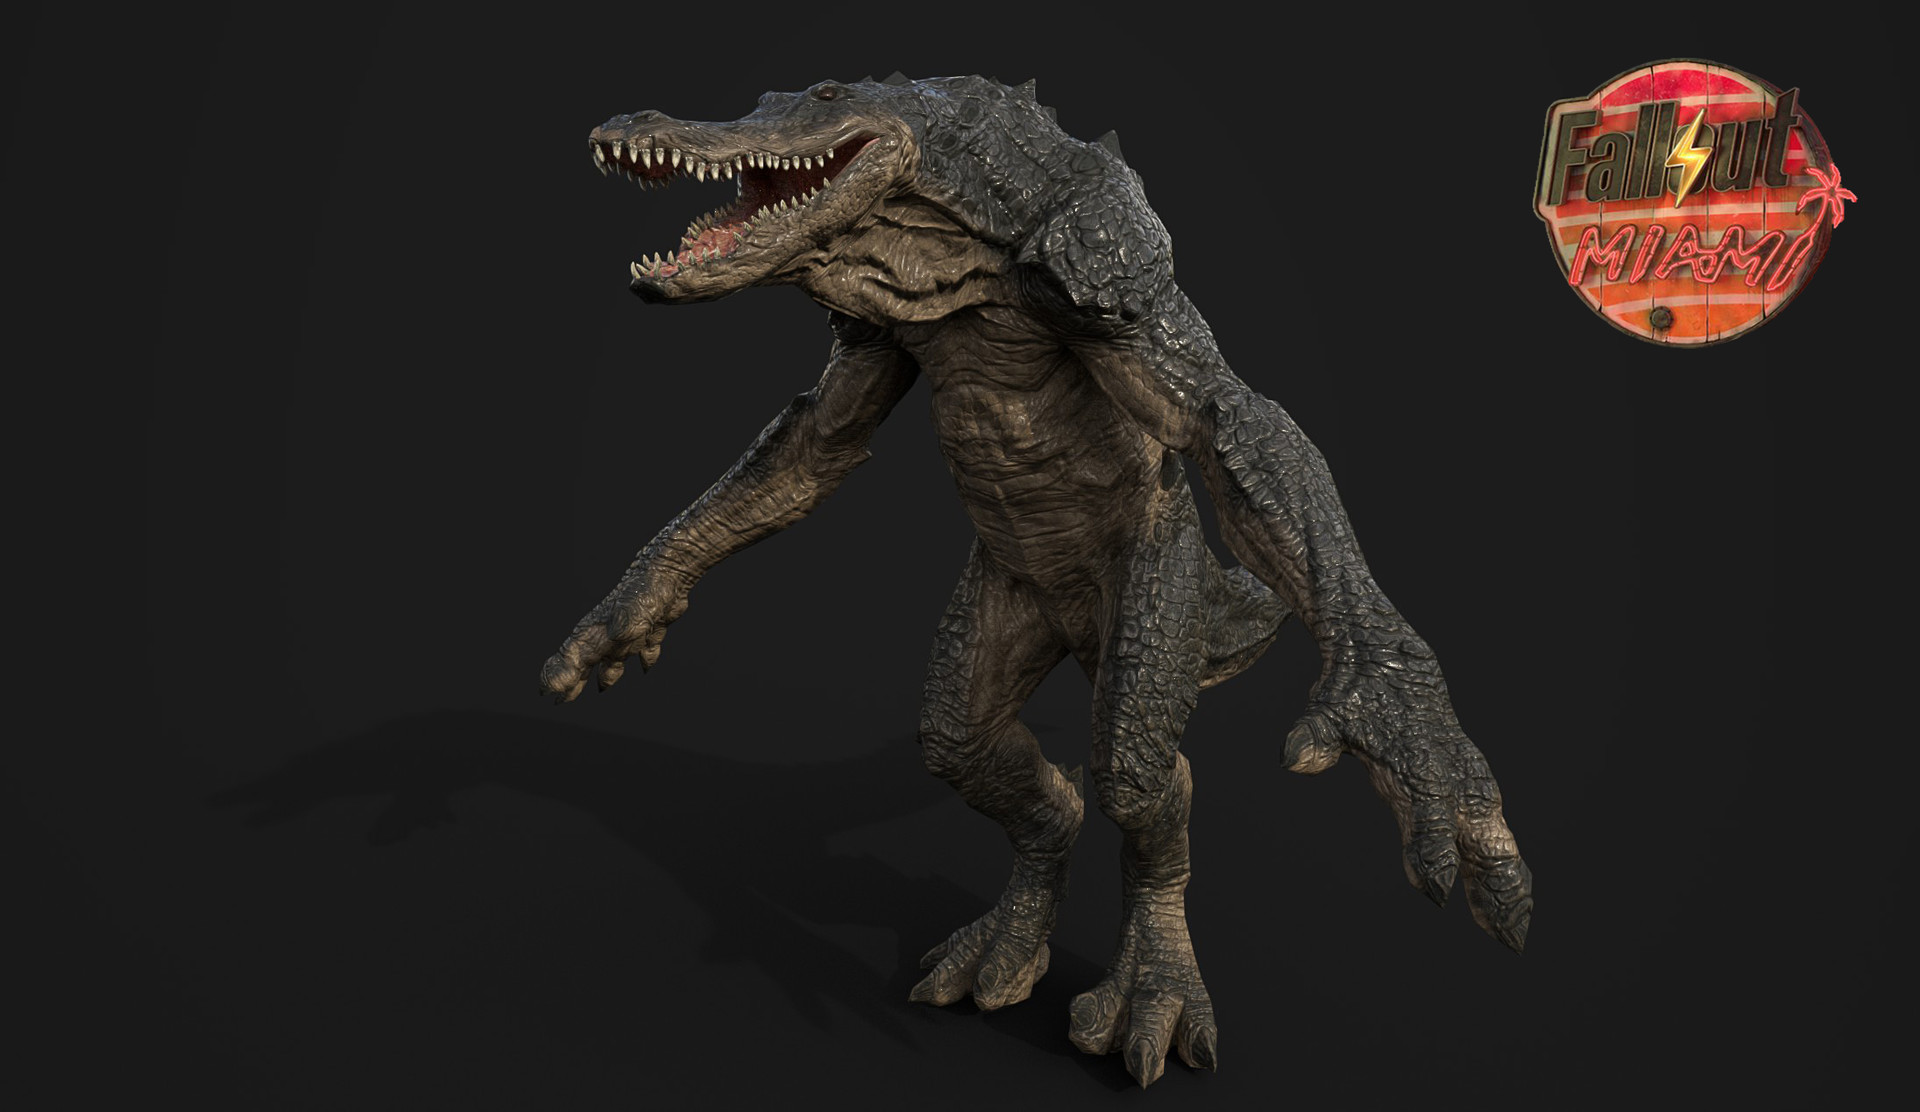 finalized texture work for the Deathjaw/gatorclaw featured in the mod Fallo...